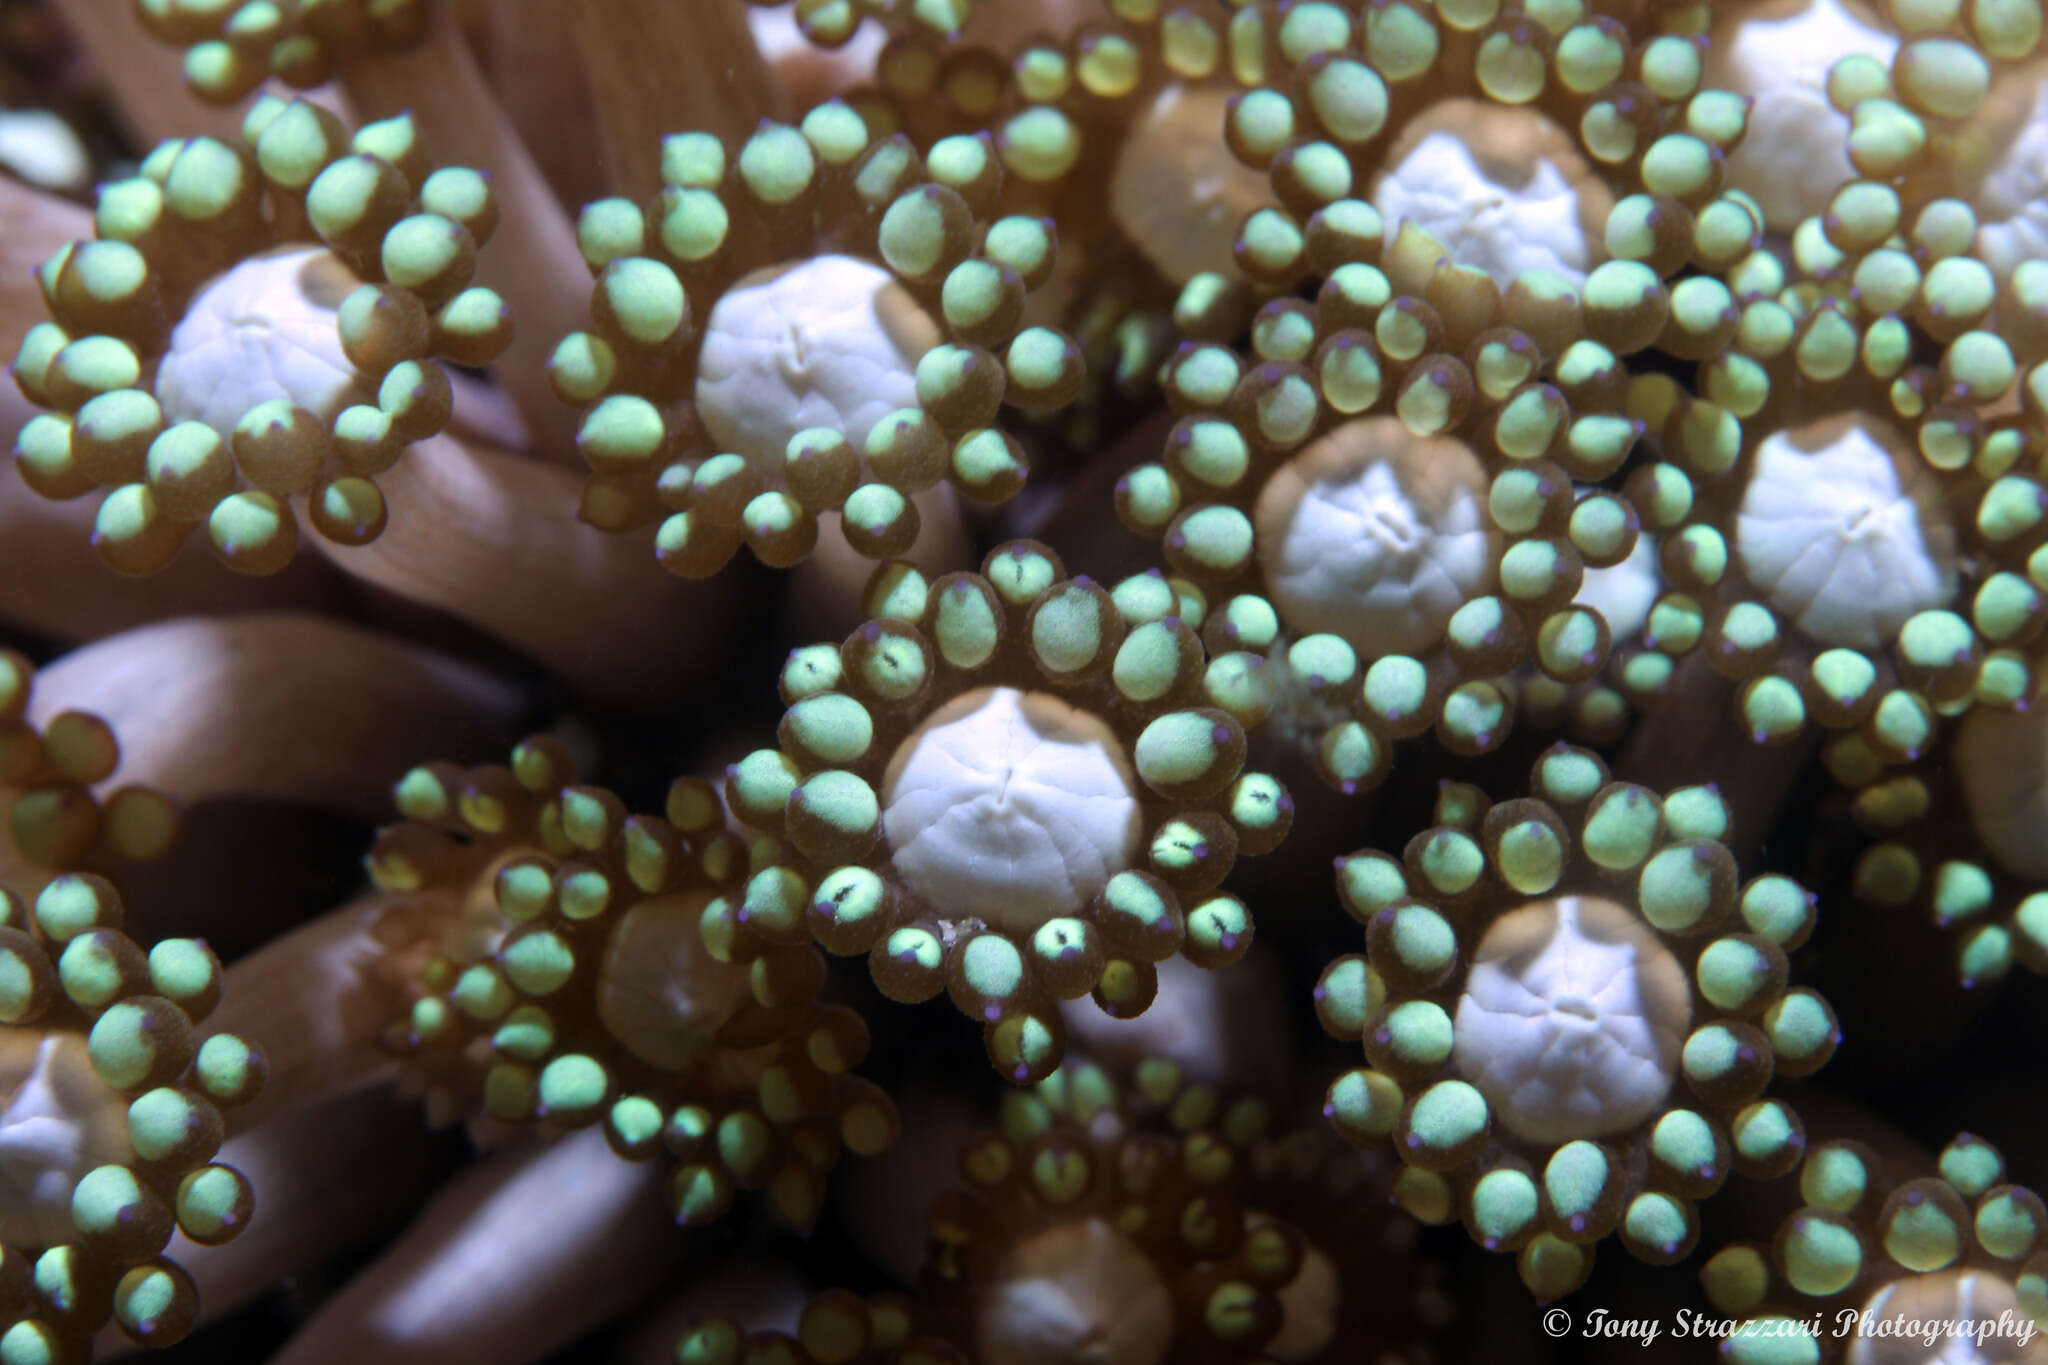 Image of anemone coral